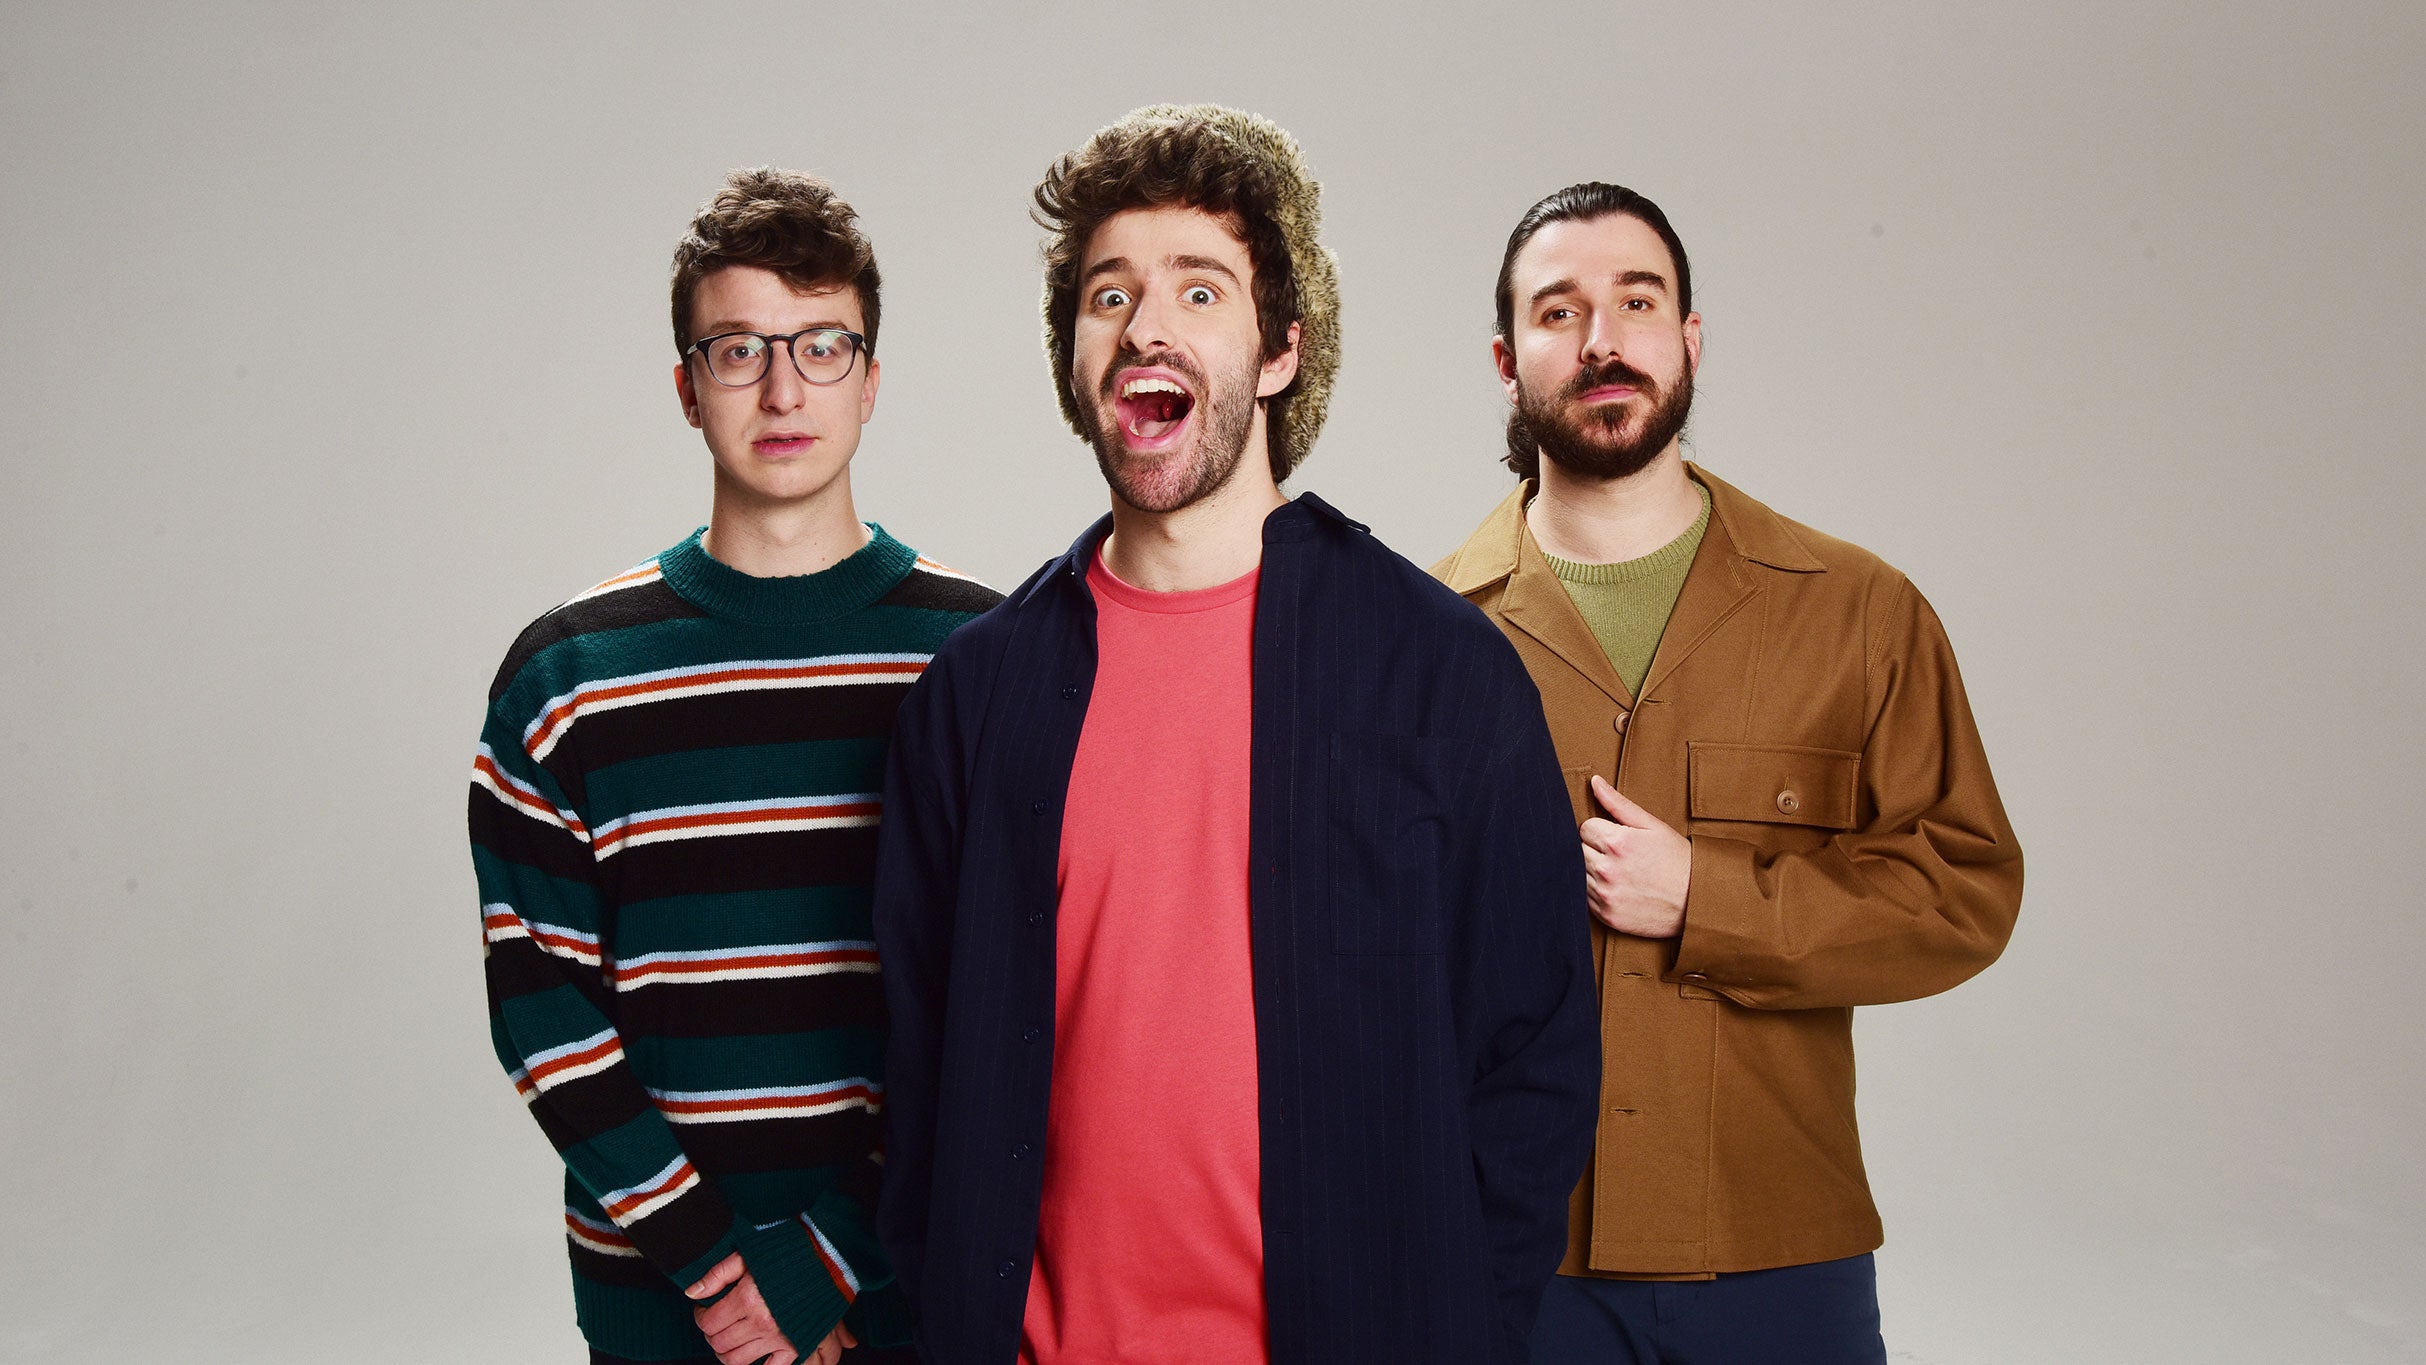 AJR with Em Beihold at The Pacific Amphitheatre